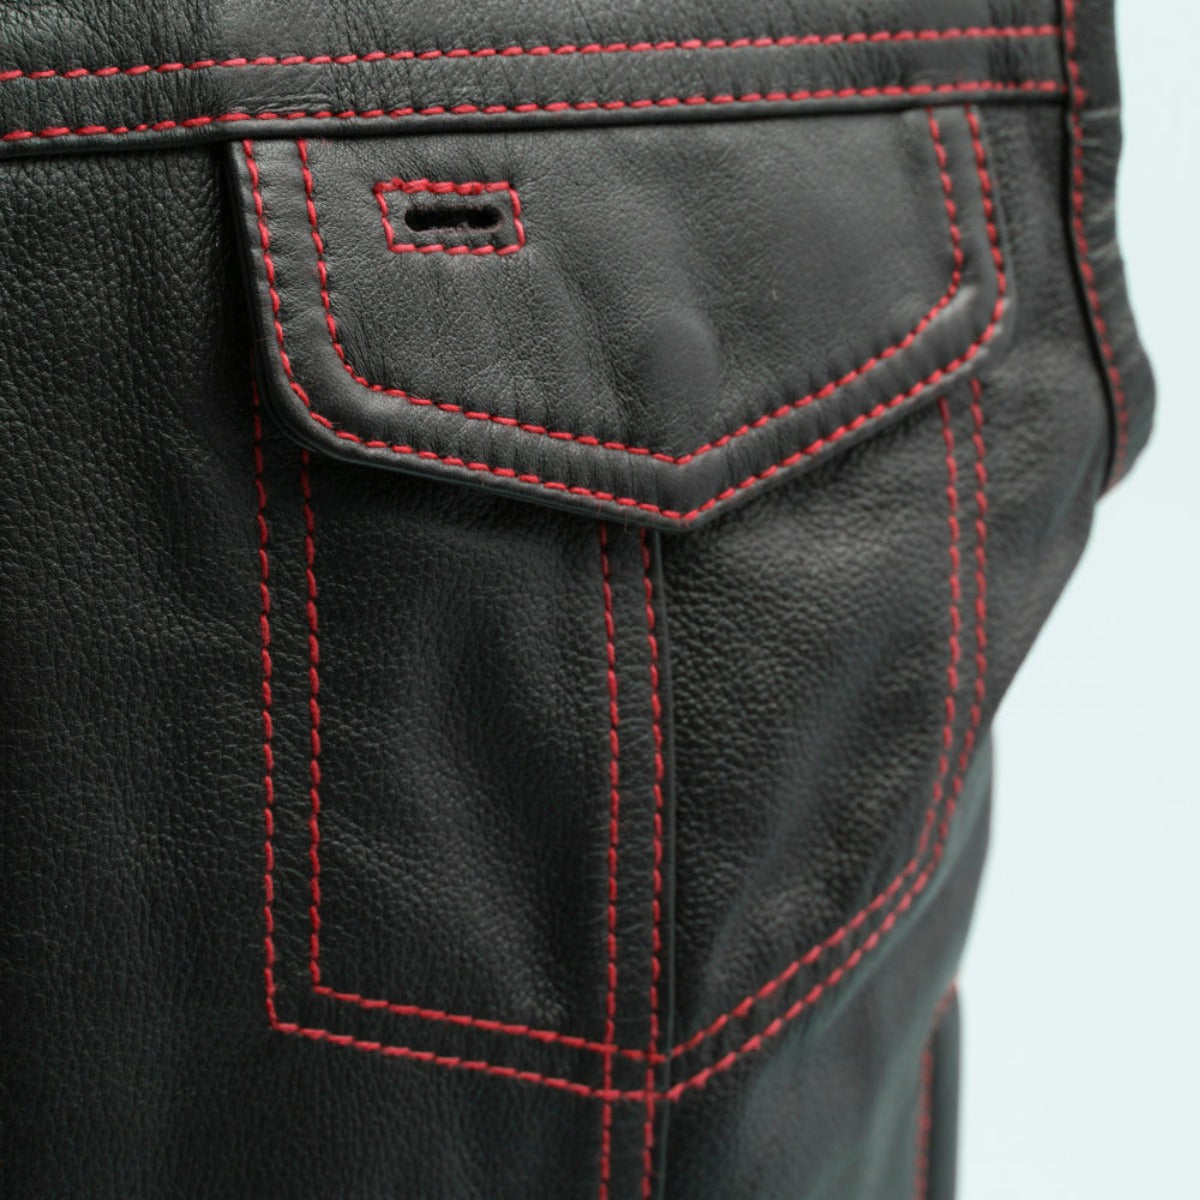 Close-up of a black milled cowhide leather First Manufacturing Men's The Cut Motorcycle Leather Vest pocket with red stitching.